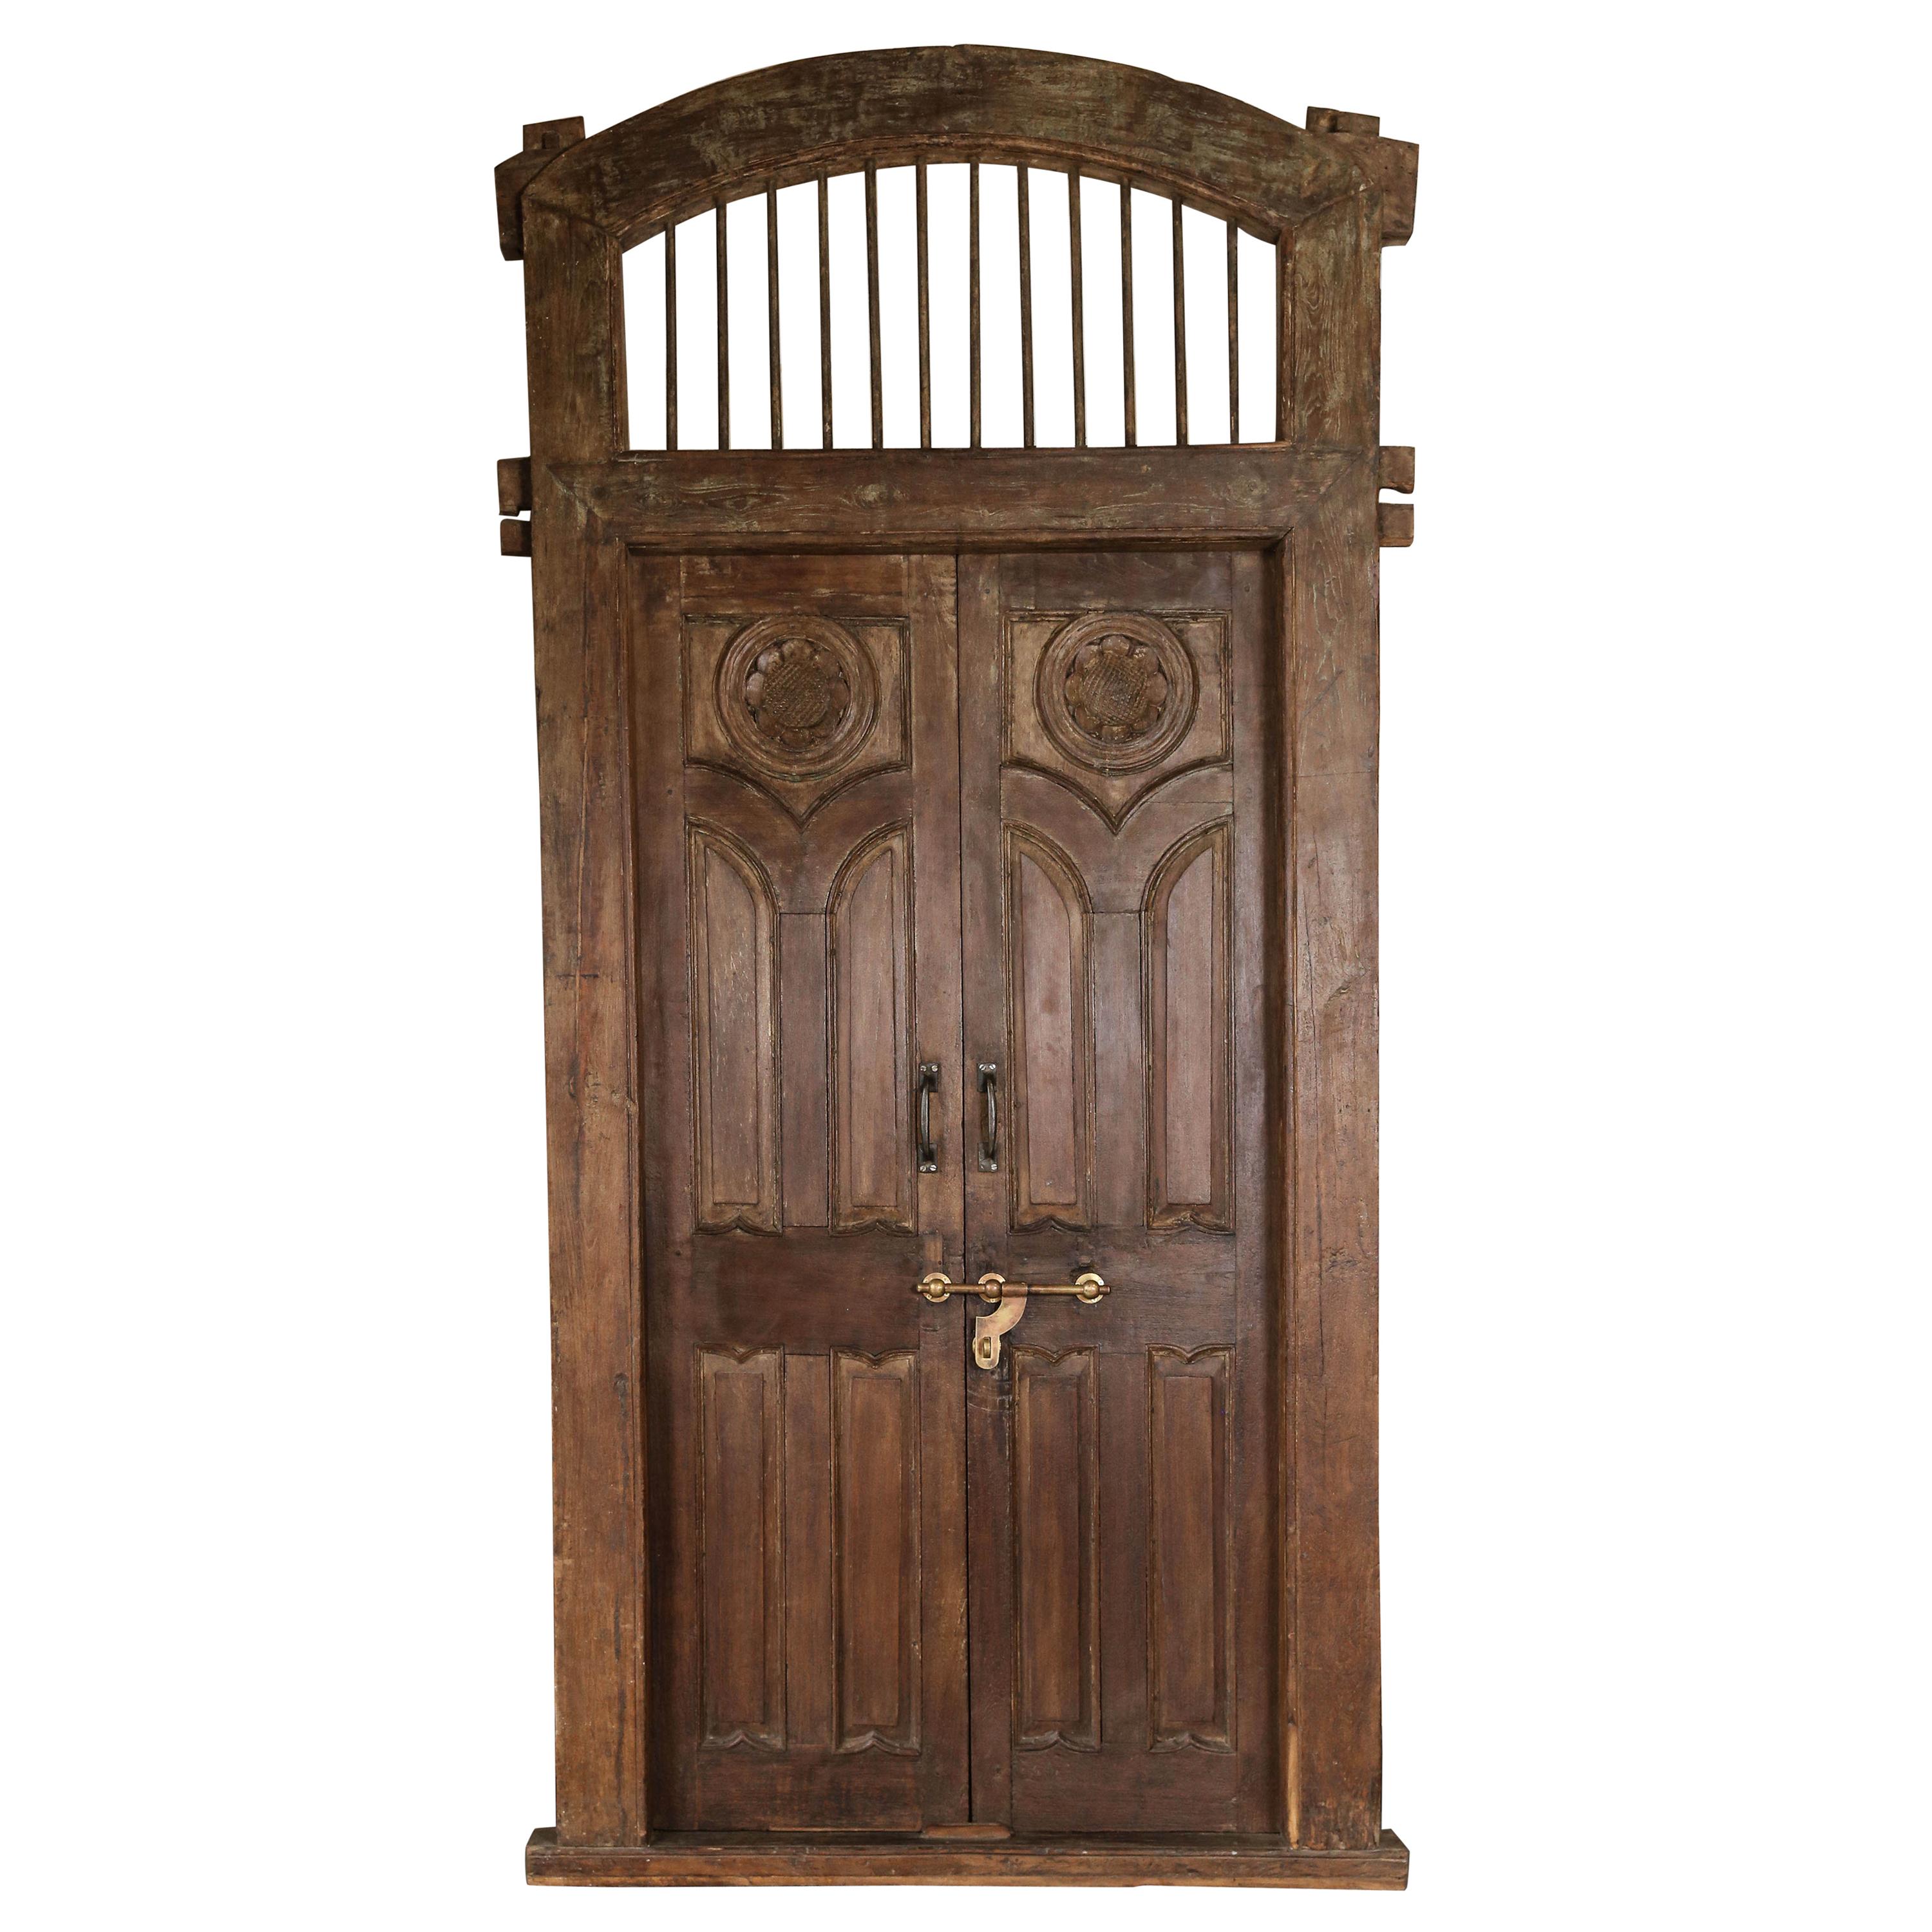 Grand Mid-19th Century Solid Teak Wood Entry Door from a Colonial Mansion For Sale